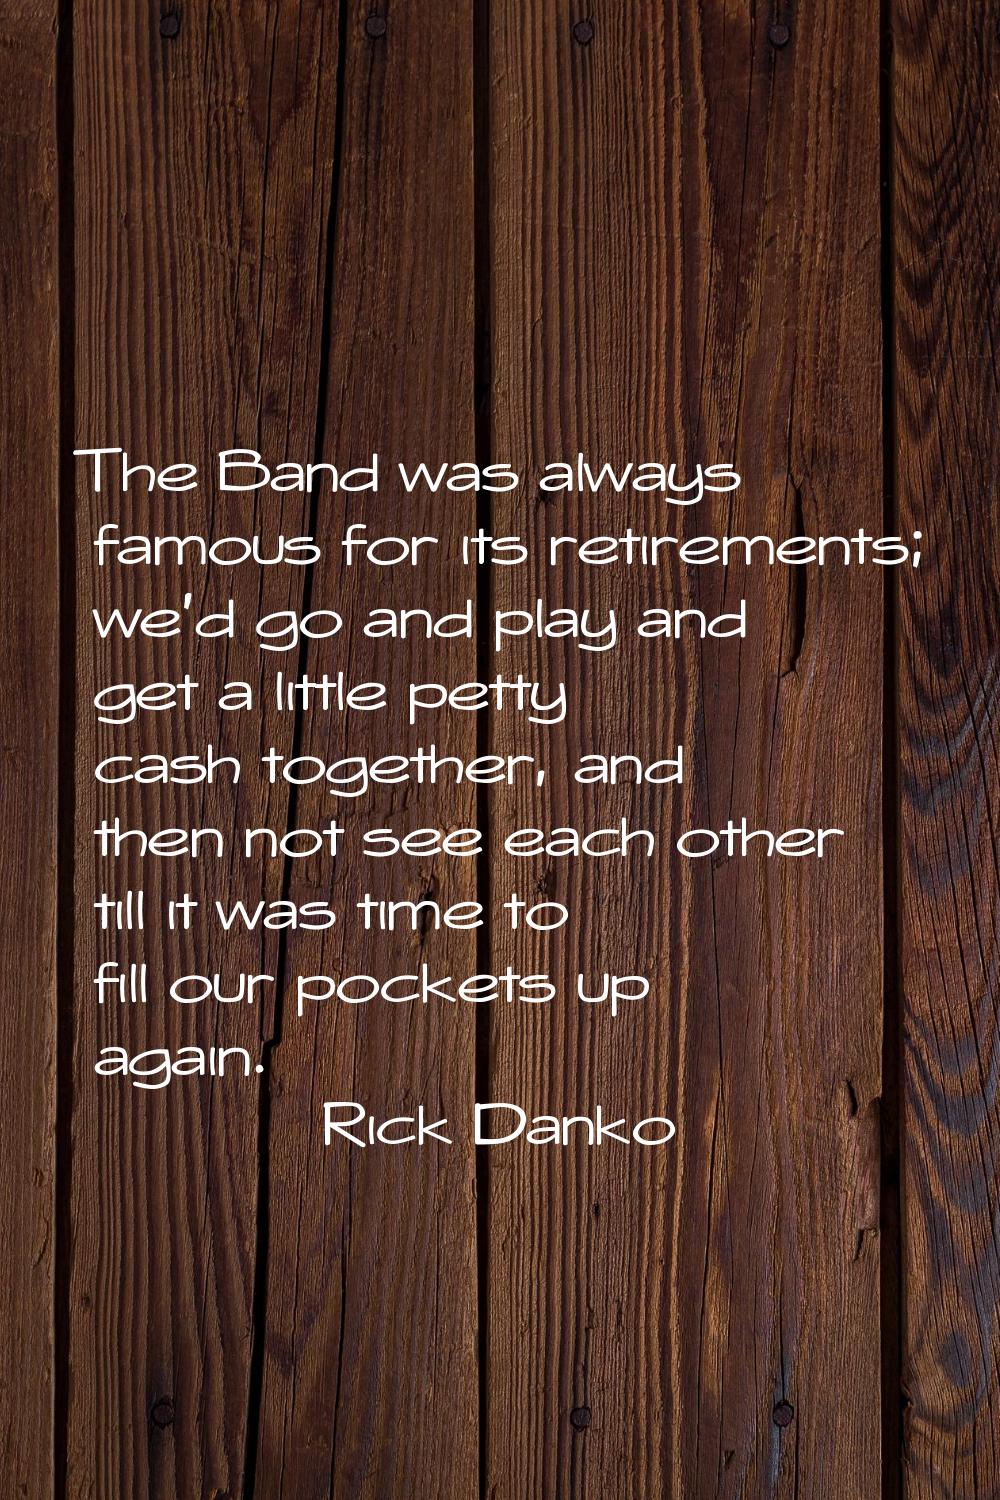 The Band was always famous for its retirements; we'd go and play and get a little petty cash togeth